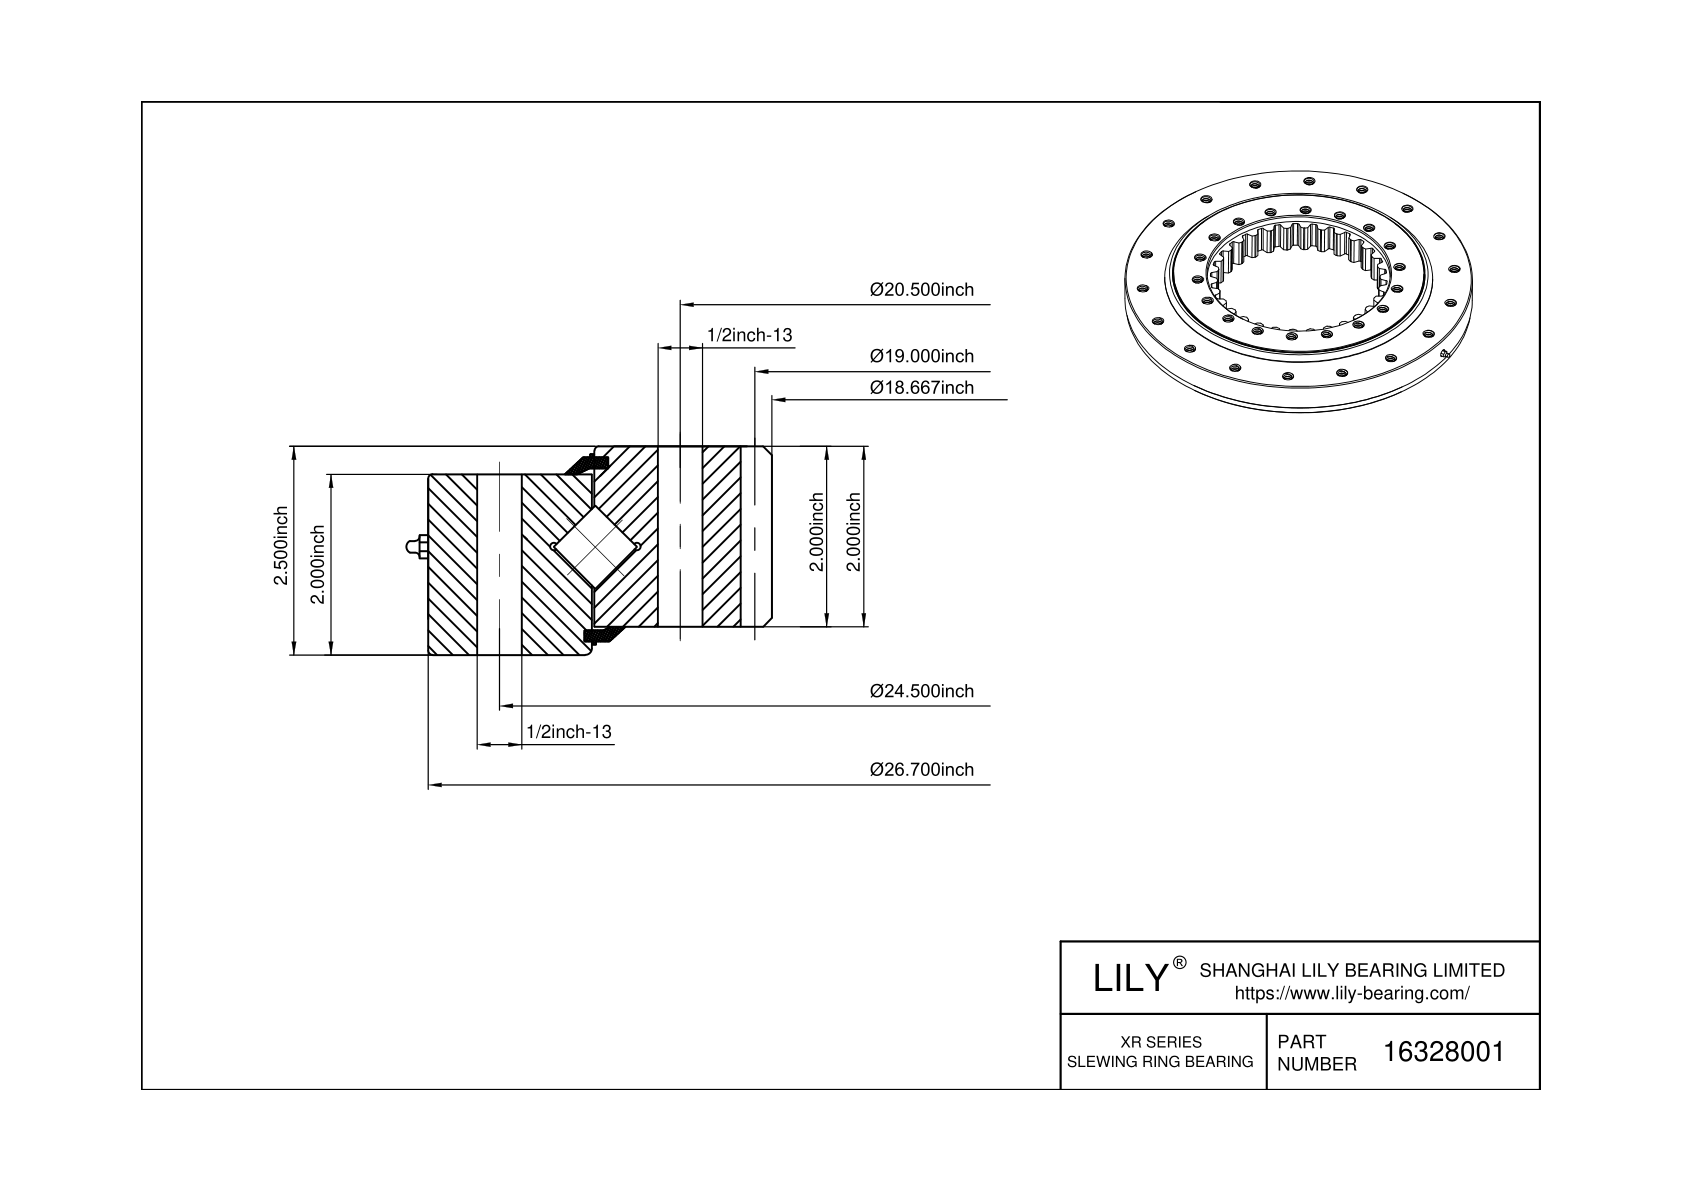 16328001 XR Series cad drawing